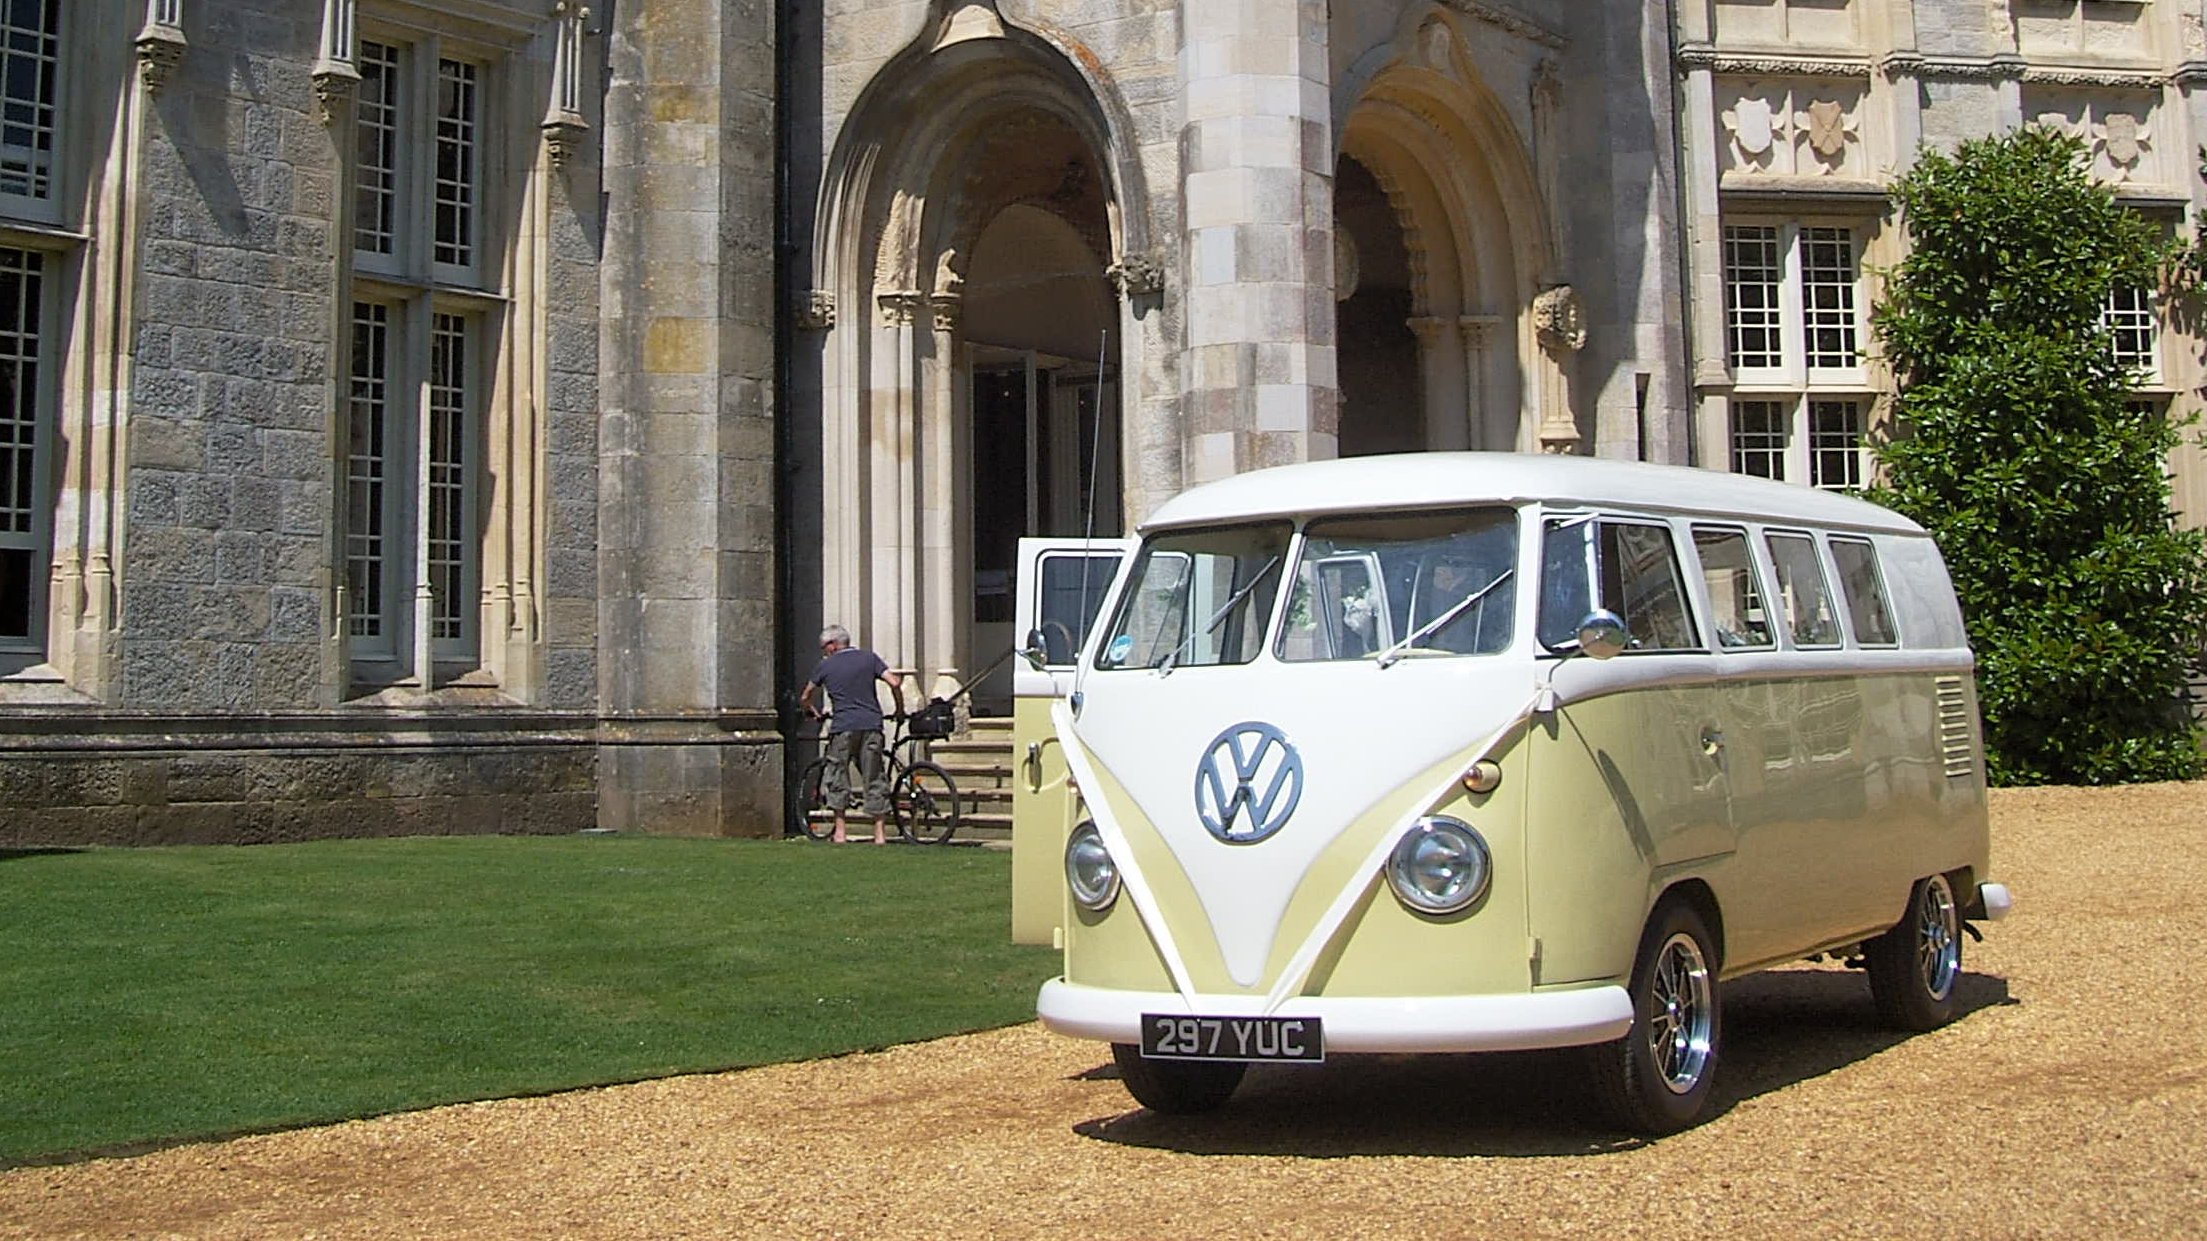 Retro Classic Volkswagen Campervan decorated with white ribbons at a local Christchurch wedding venue.